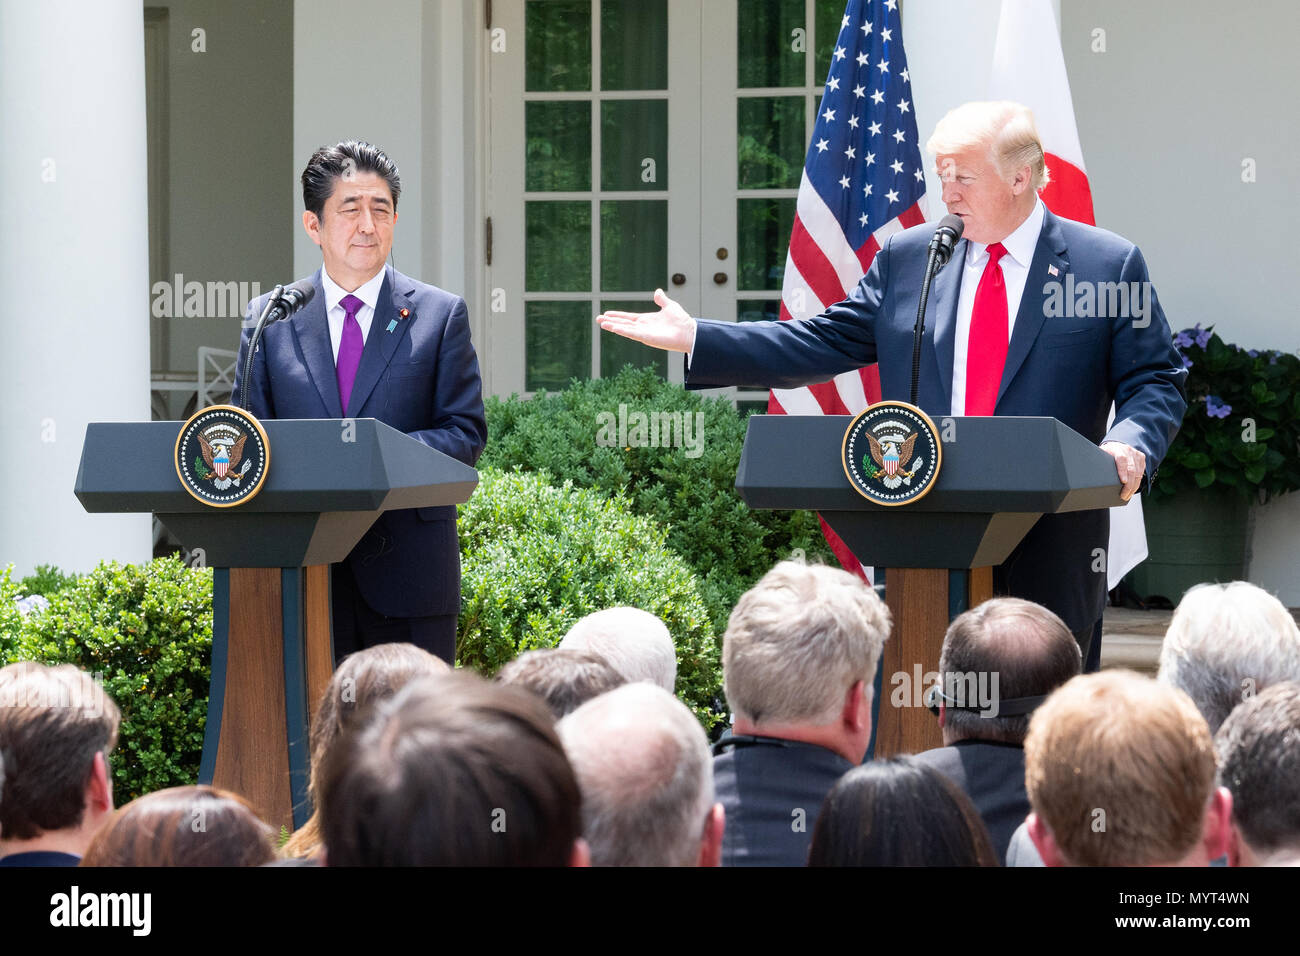 President Donald Trump and Shinzo Abe, the Prime Minister of Japan, in the Rose Garden at the White House. US President Donald Trump and Japan's Prime Minister Shinzo Abe take part in a joint press conference in the Rose Garden of the White House. Stock Photo